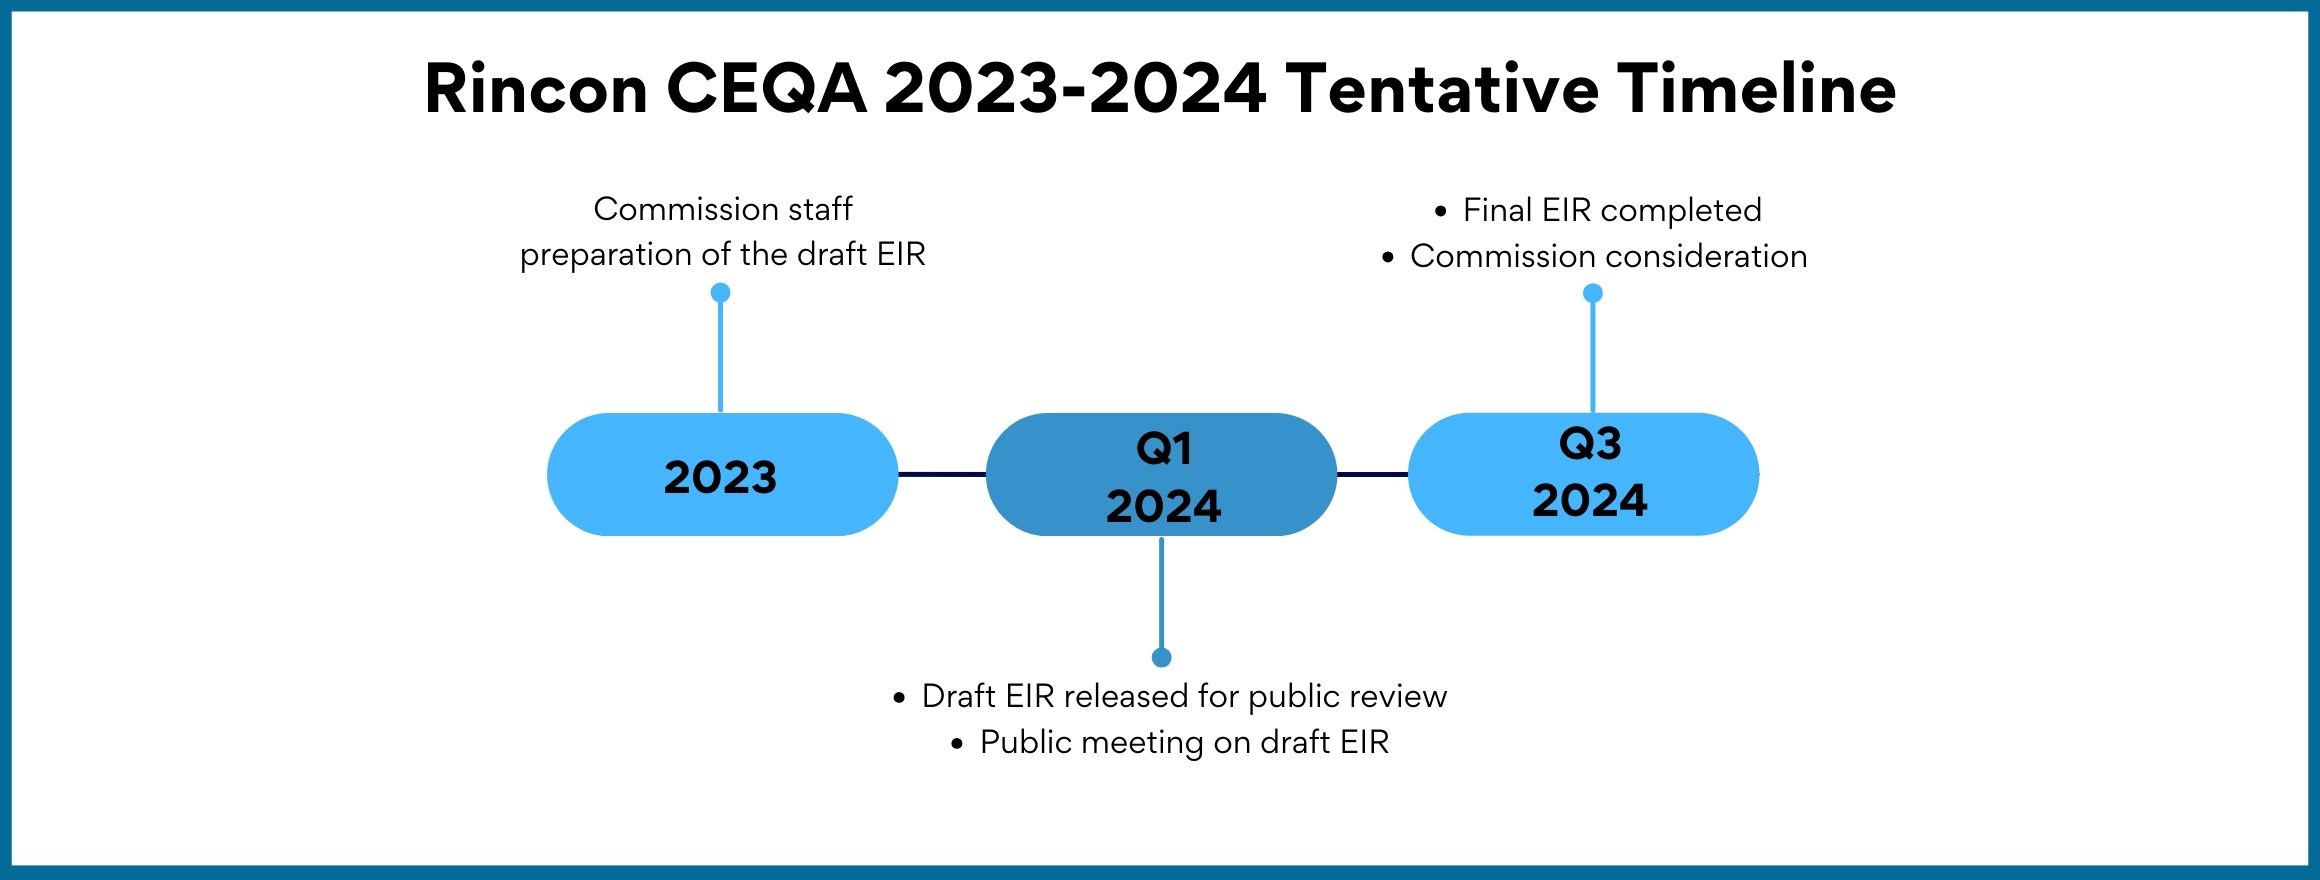 4 quarter timeline. 1st quarter is Commission staff preparation of draft EIR. 2nd quarter is Commission staff preparation of the draft EIR, 3rd quarter is draft EIR released for public review and public meeting on the draft EIR, 4th quarter is final EIR completed and Commission consideration